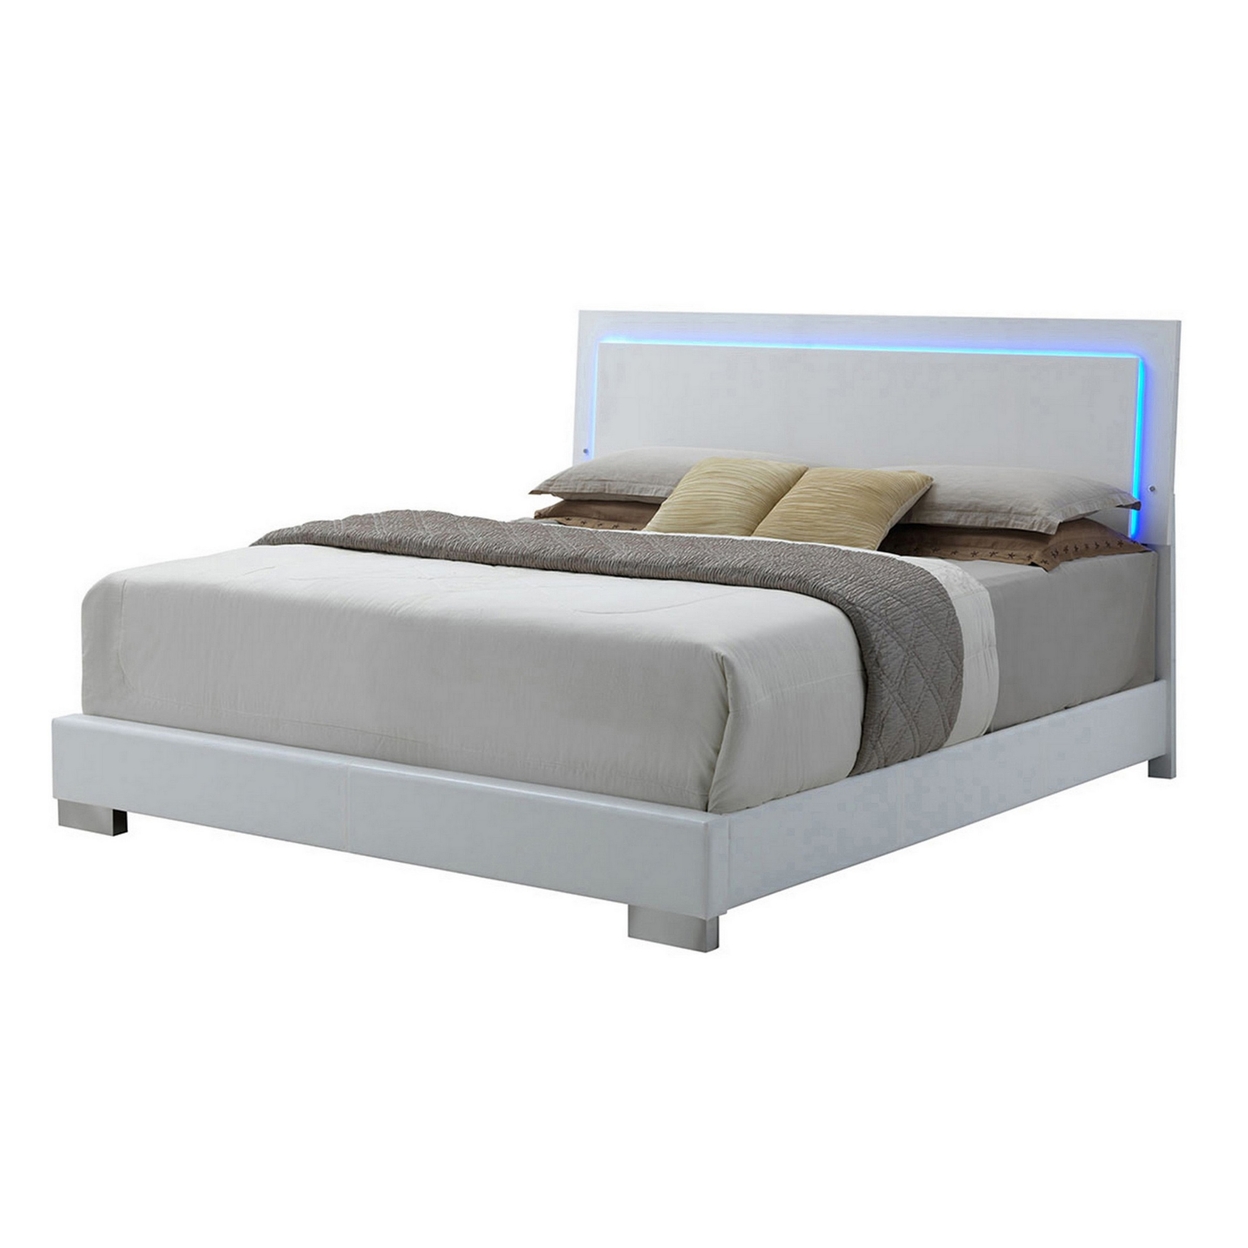 Sok Queen Panel Bed With LED Headboard, Low Profile Footboard, Glossy White- Saltoro Sherpi